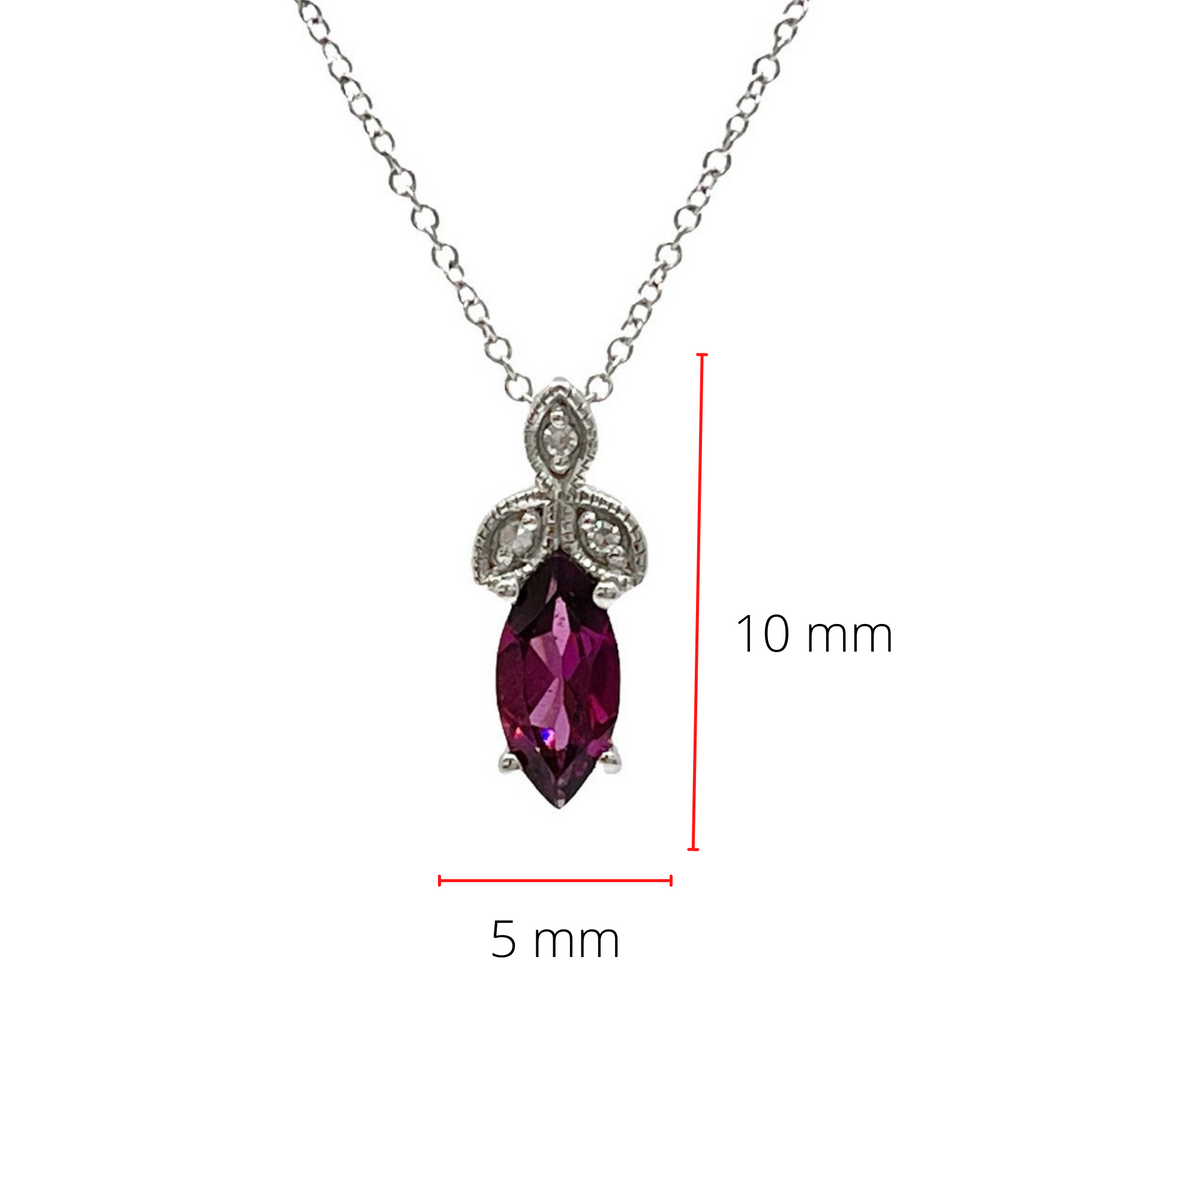 10K White Gold 8mm x 4mm Rhodalite Garnet and 0.02cttw Diamond Pendant with Rolo Chain - 18 Inches